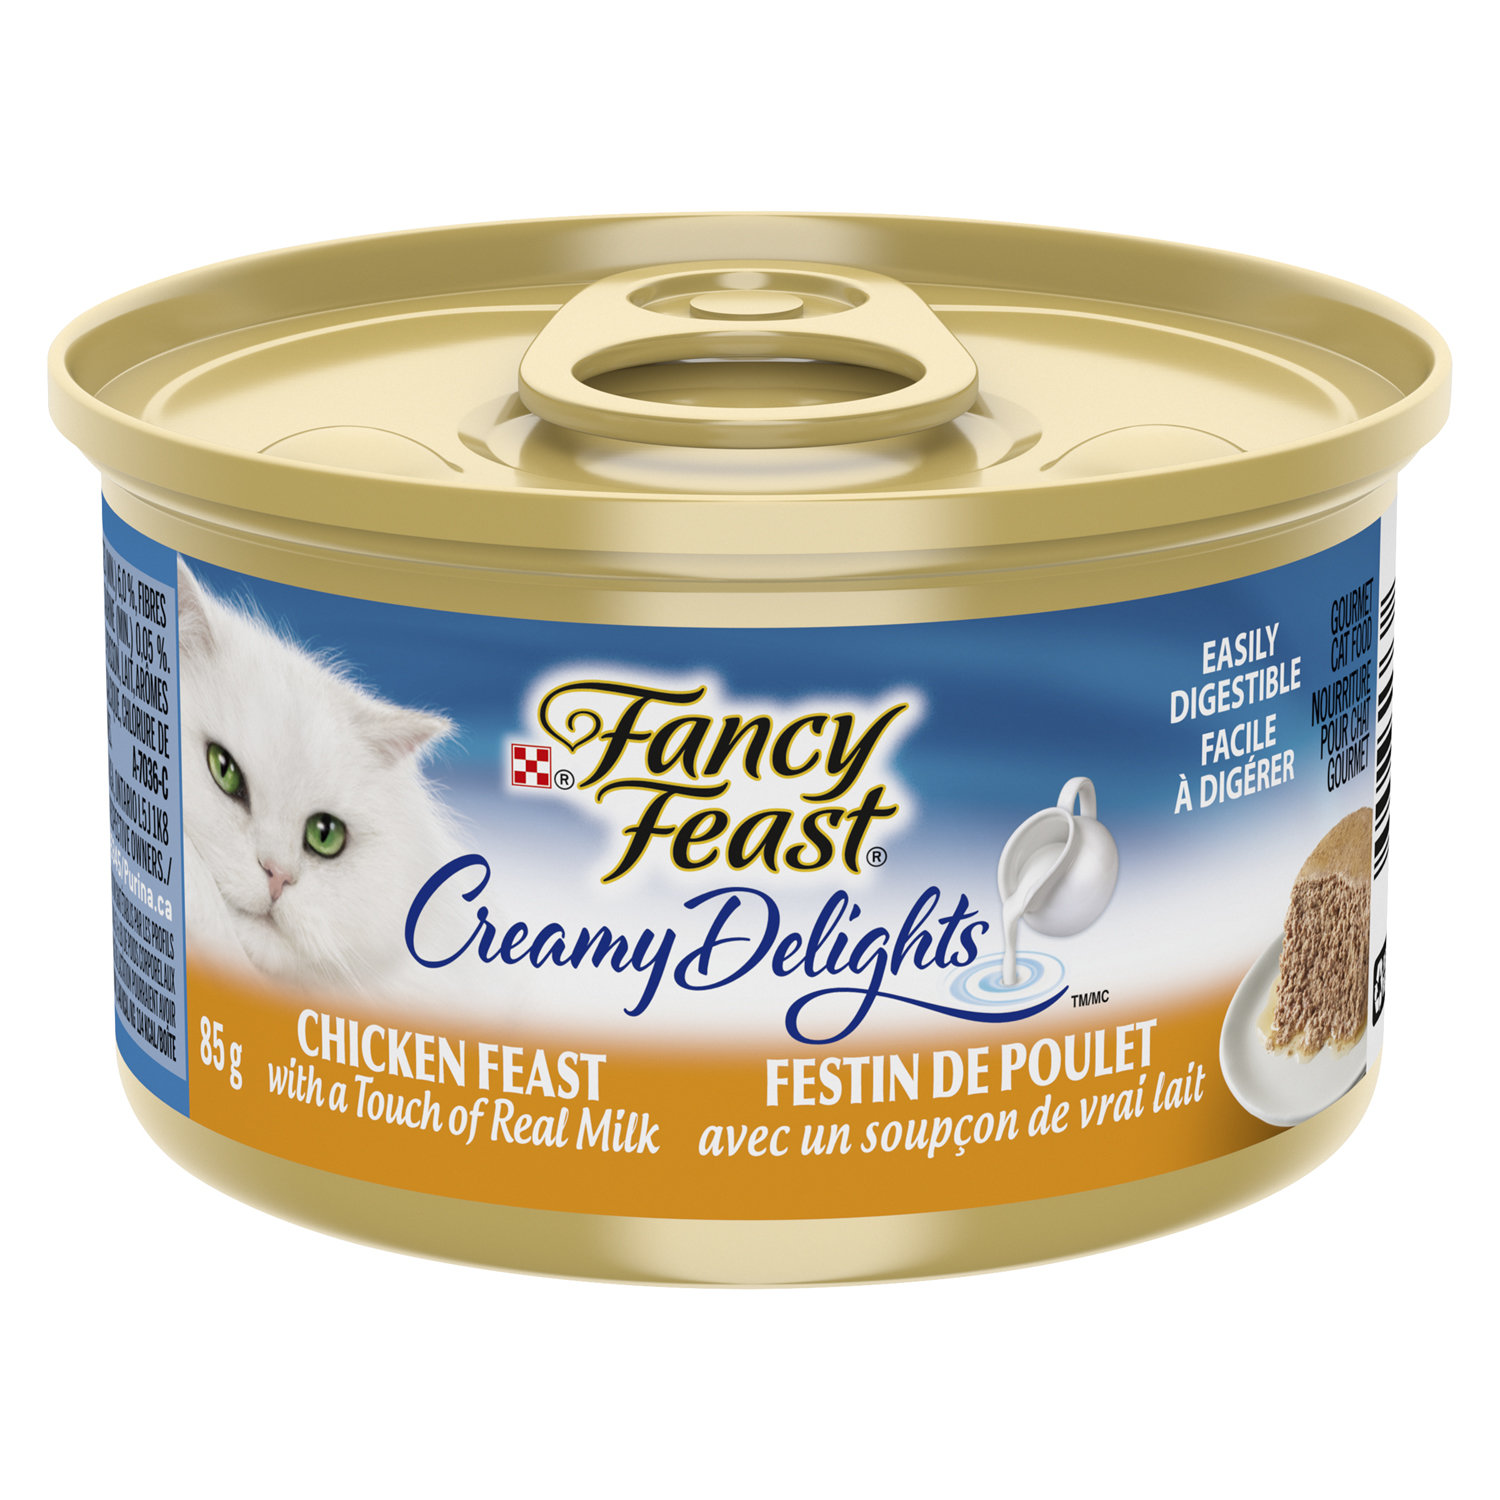 Purina Fancy Feast Creamy Delights Chicken Feast With a Touch of Real Milk Wet 